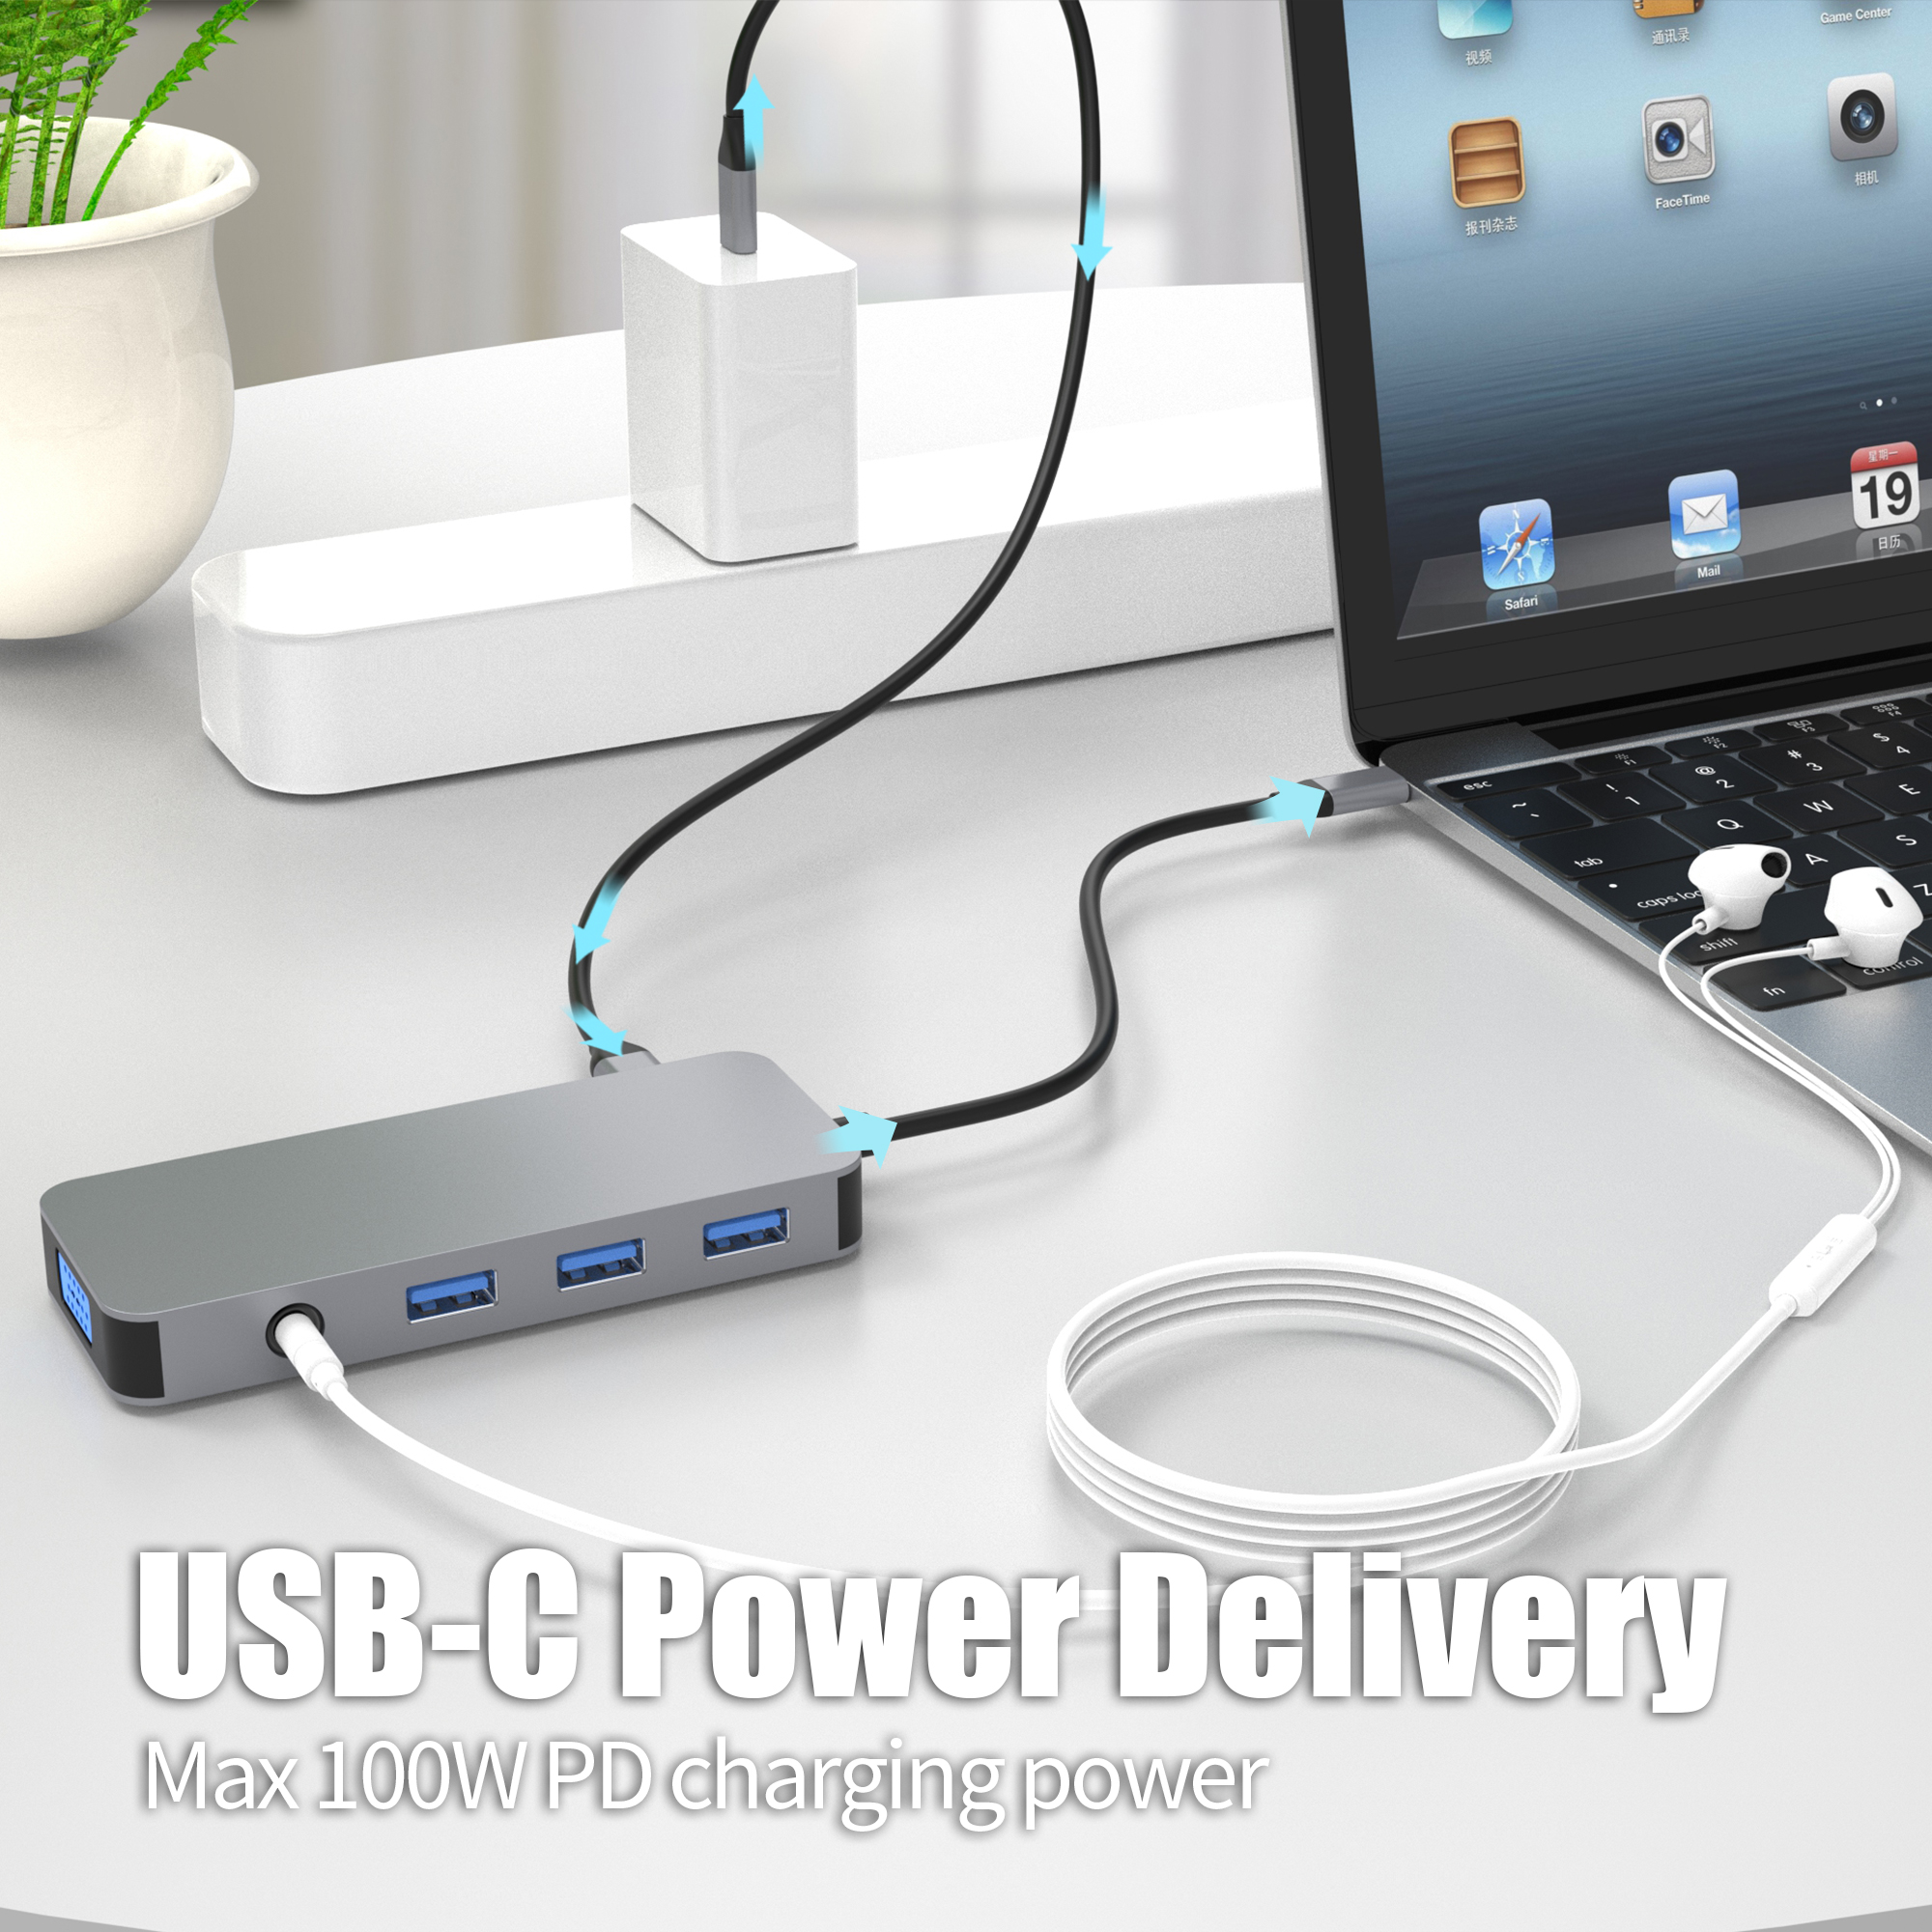 10 IN 1 usb c hub with 2 x HDMI 4K 30HZ+ VGA + PD 100W + USB A 3.1 10Gbps + 2 x USB A 2.0 + 3.5mm AUX + SD + TF card reader multi port docking station for laptop/phone